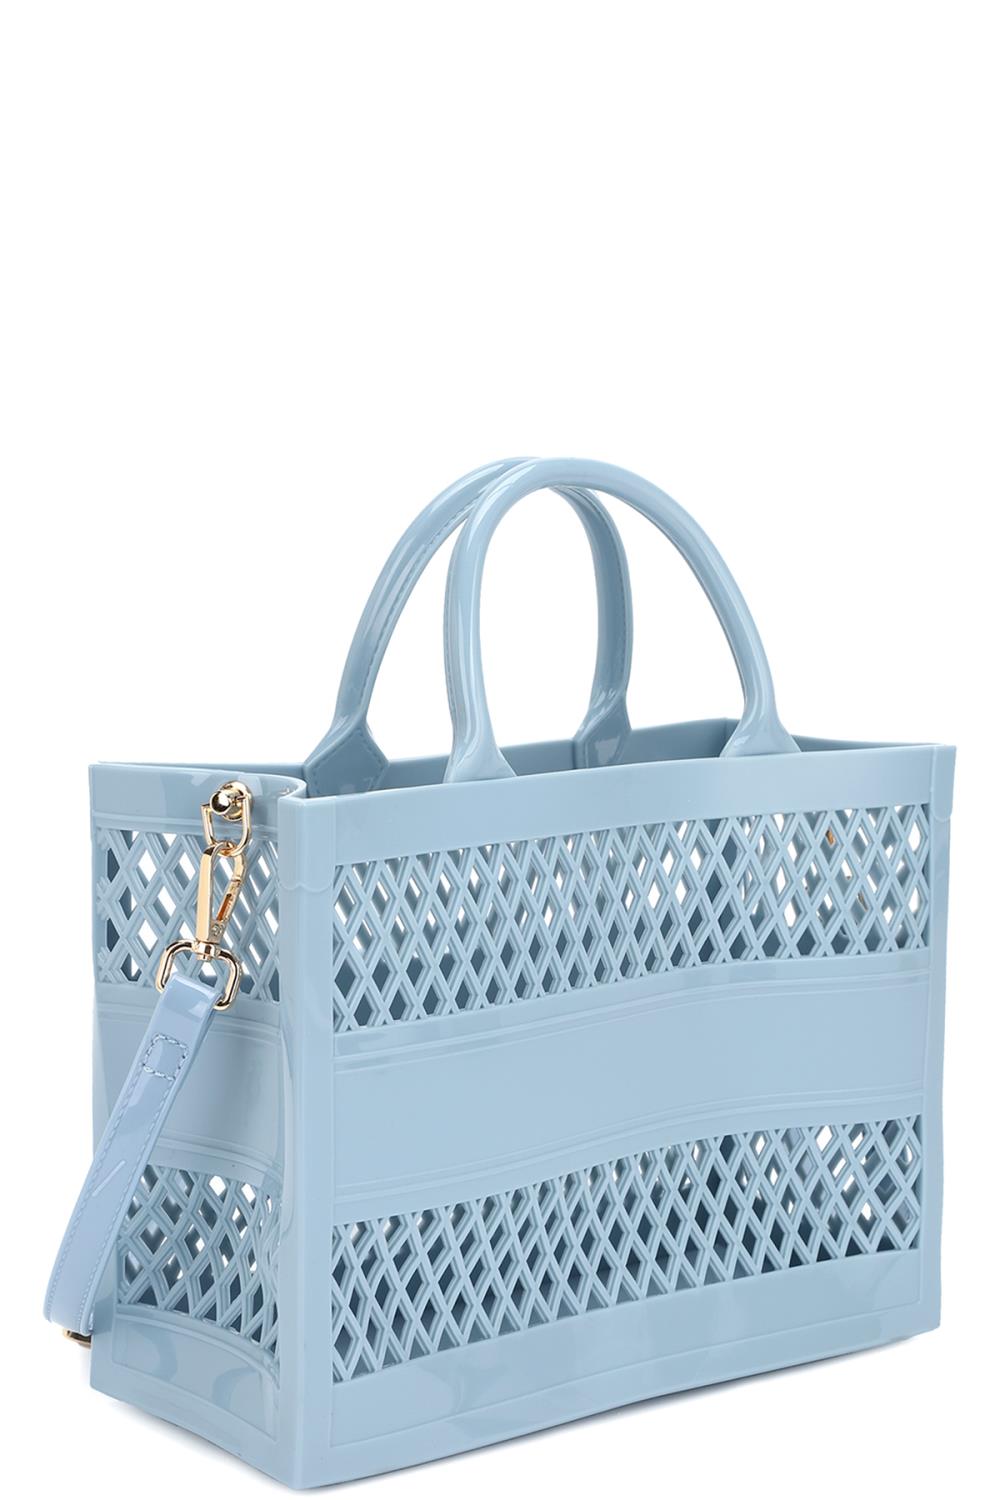 Sandy Delight Tote - Veronica Luxe-Bags